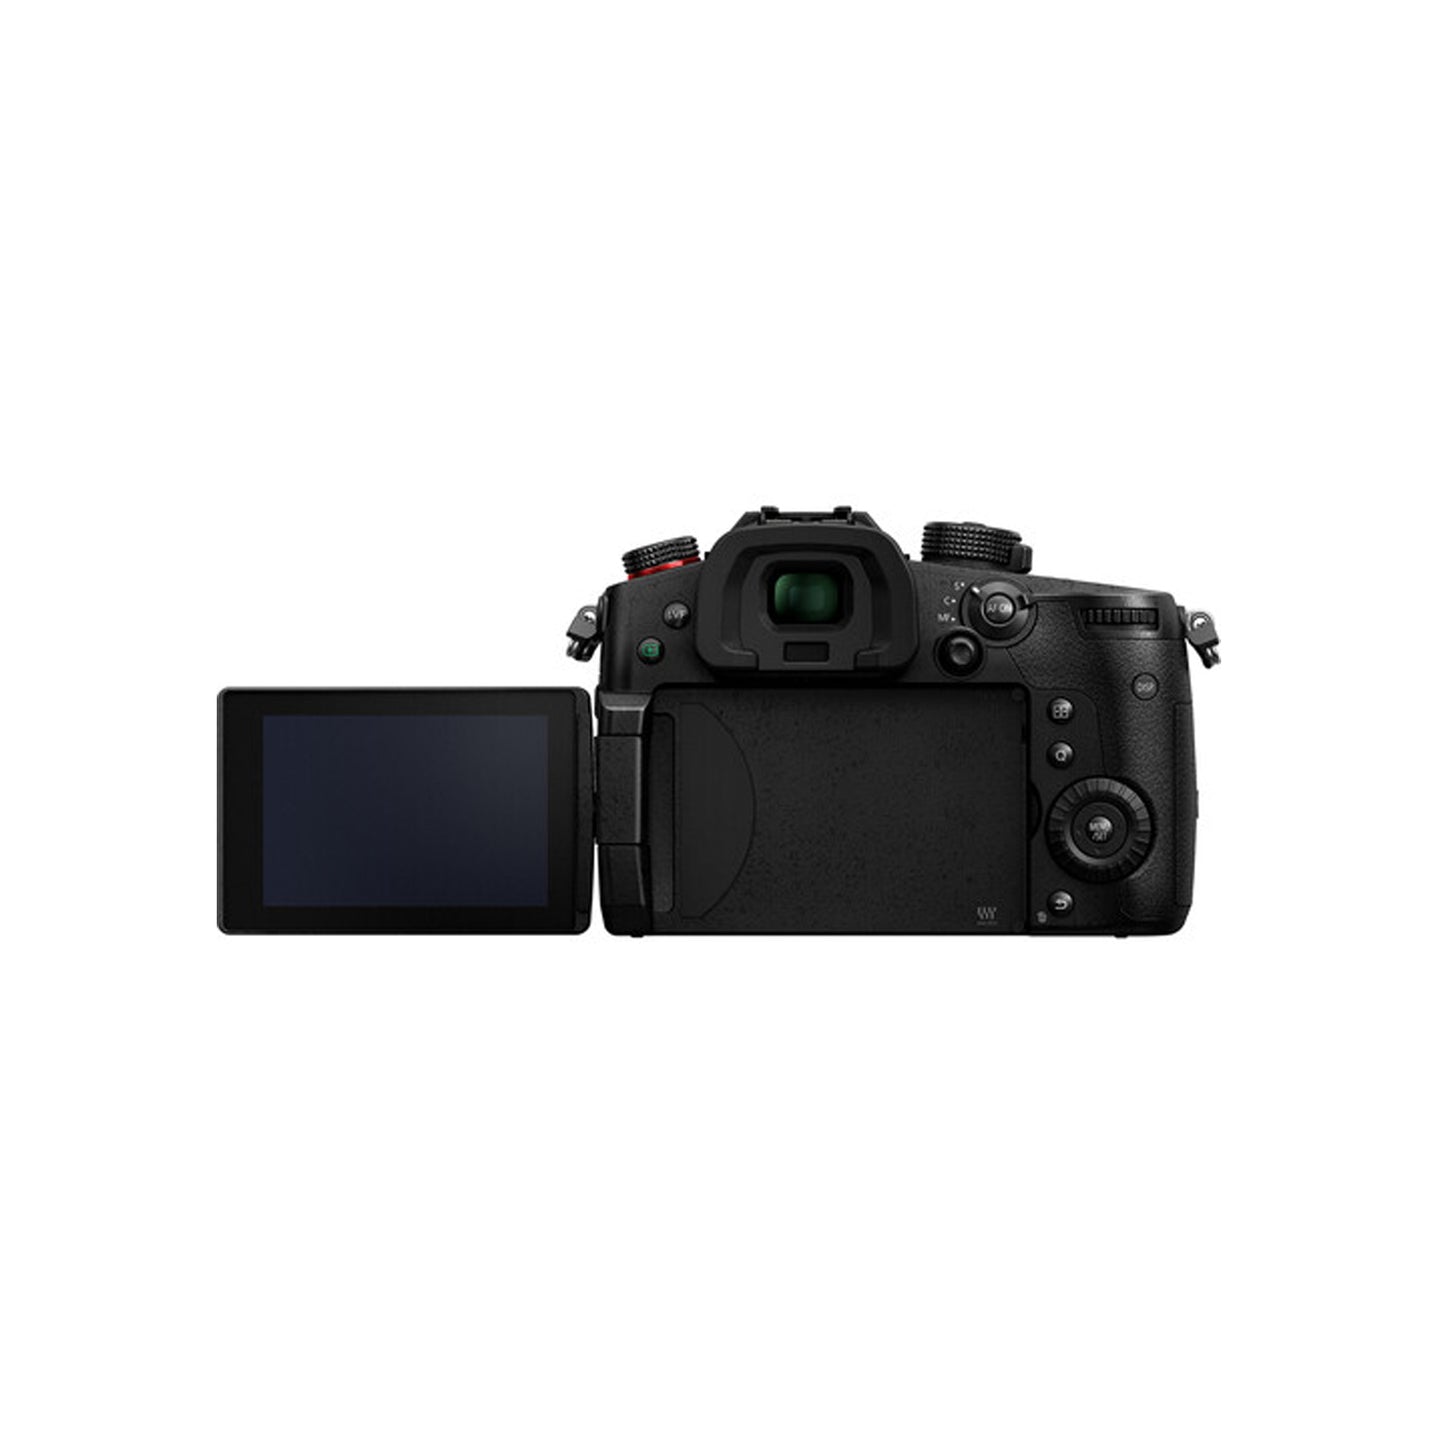 Panasonic Lumix GH5 II Mirrorless Digital Camera with Wireless / Wired Interface, MOS Sensor, Dual I.S. 2, 4K 60p Video and 3" Dot Free-Angle Tilting Touchscreen LCD Display (Body Only) | DC-GH5MII